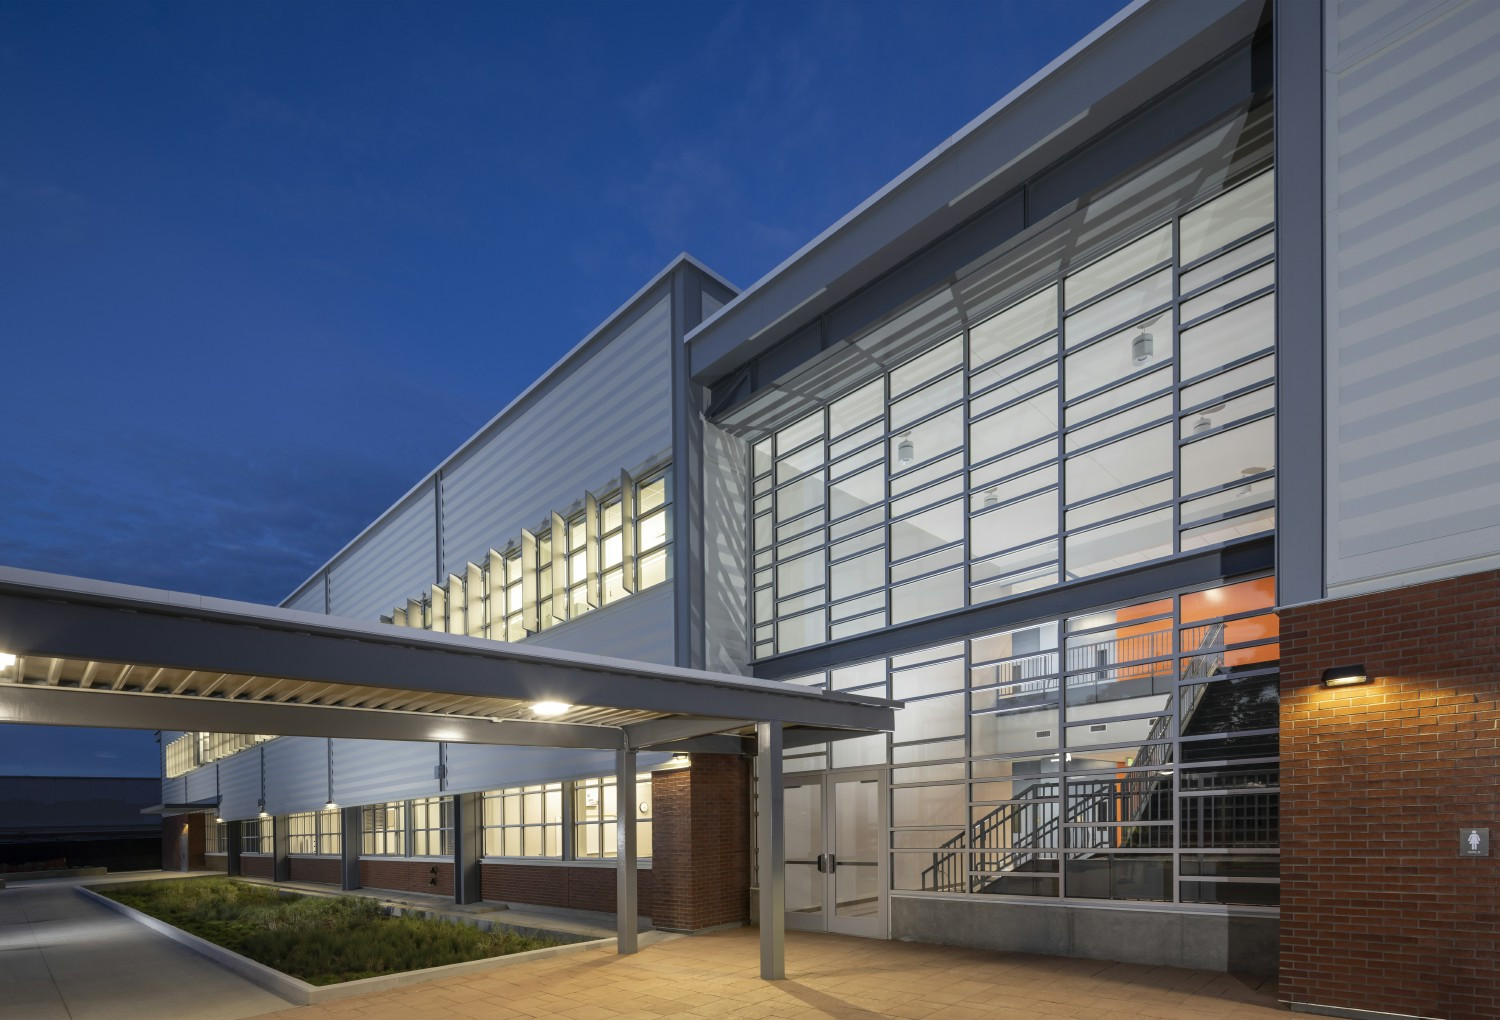 Los Angeles USD Grant High School Comprehensive Modernization. An ongoing design-build project.